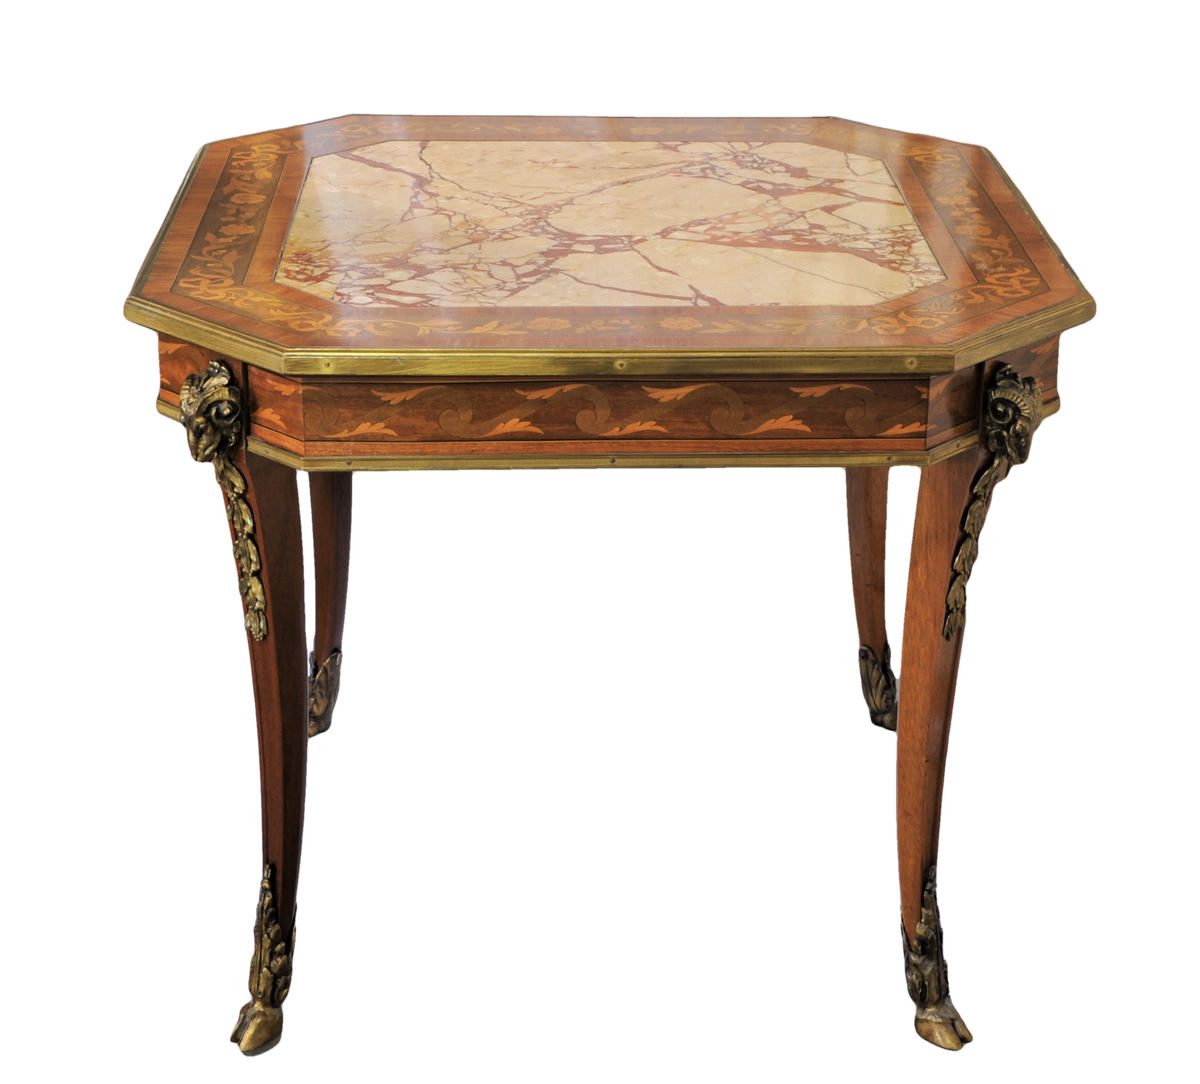 Napoleon III Style Marquetry and Ormolu Mounted Breccia Marble Table